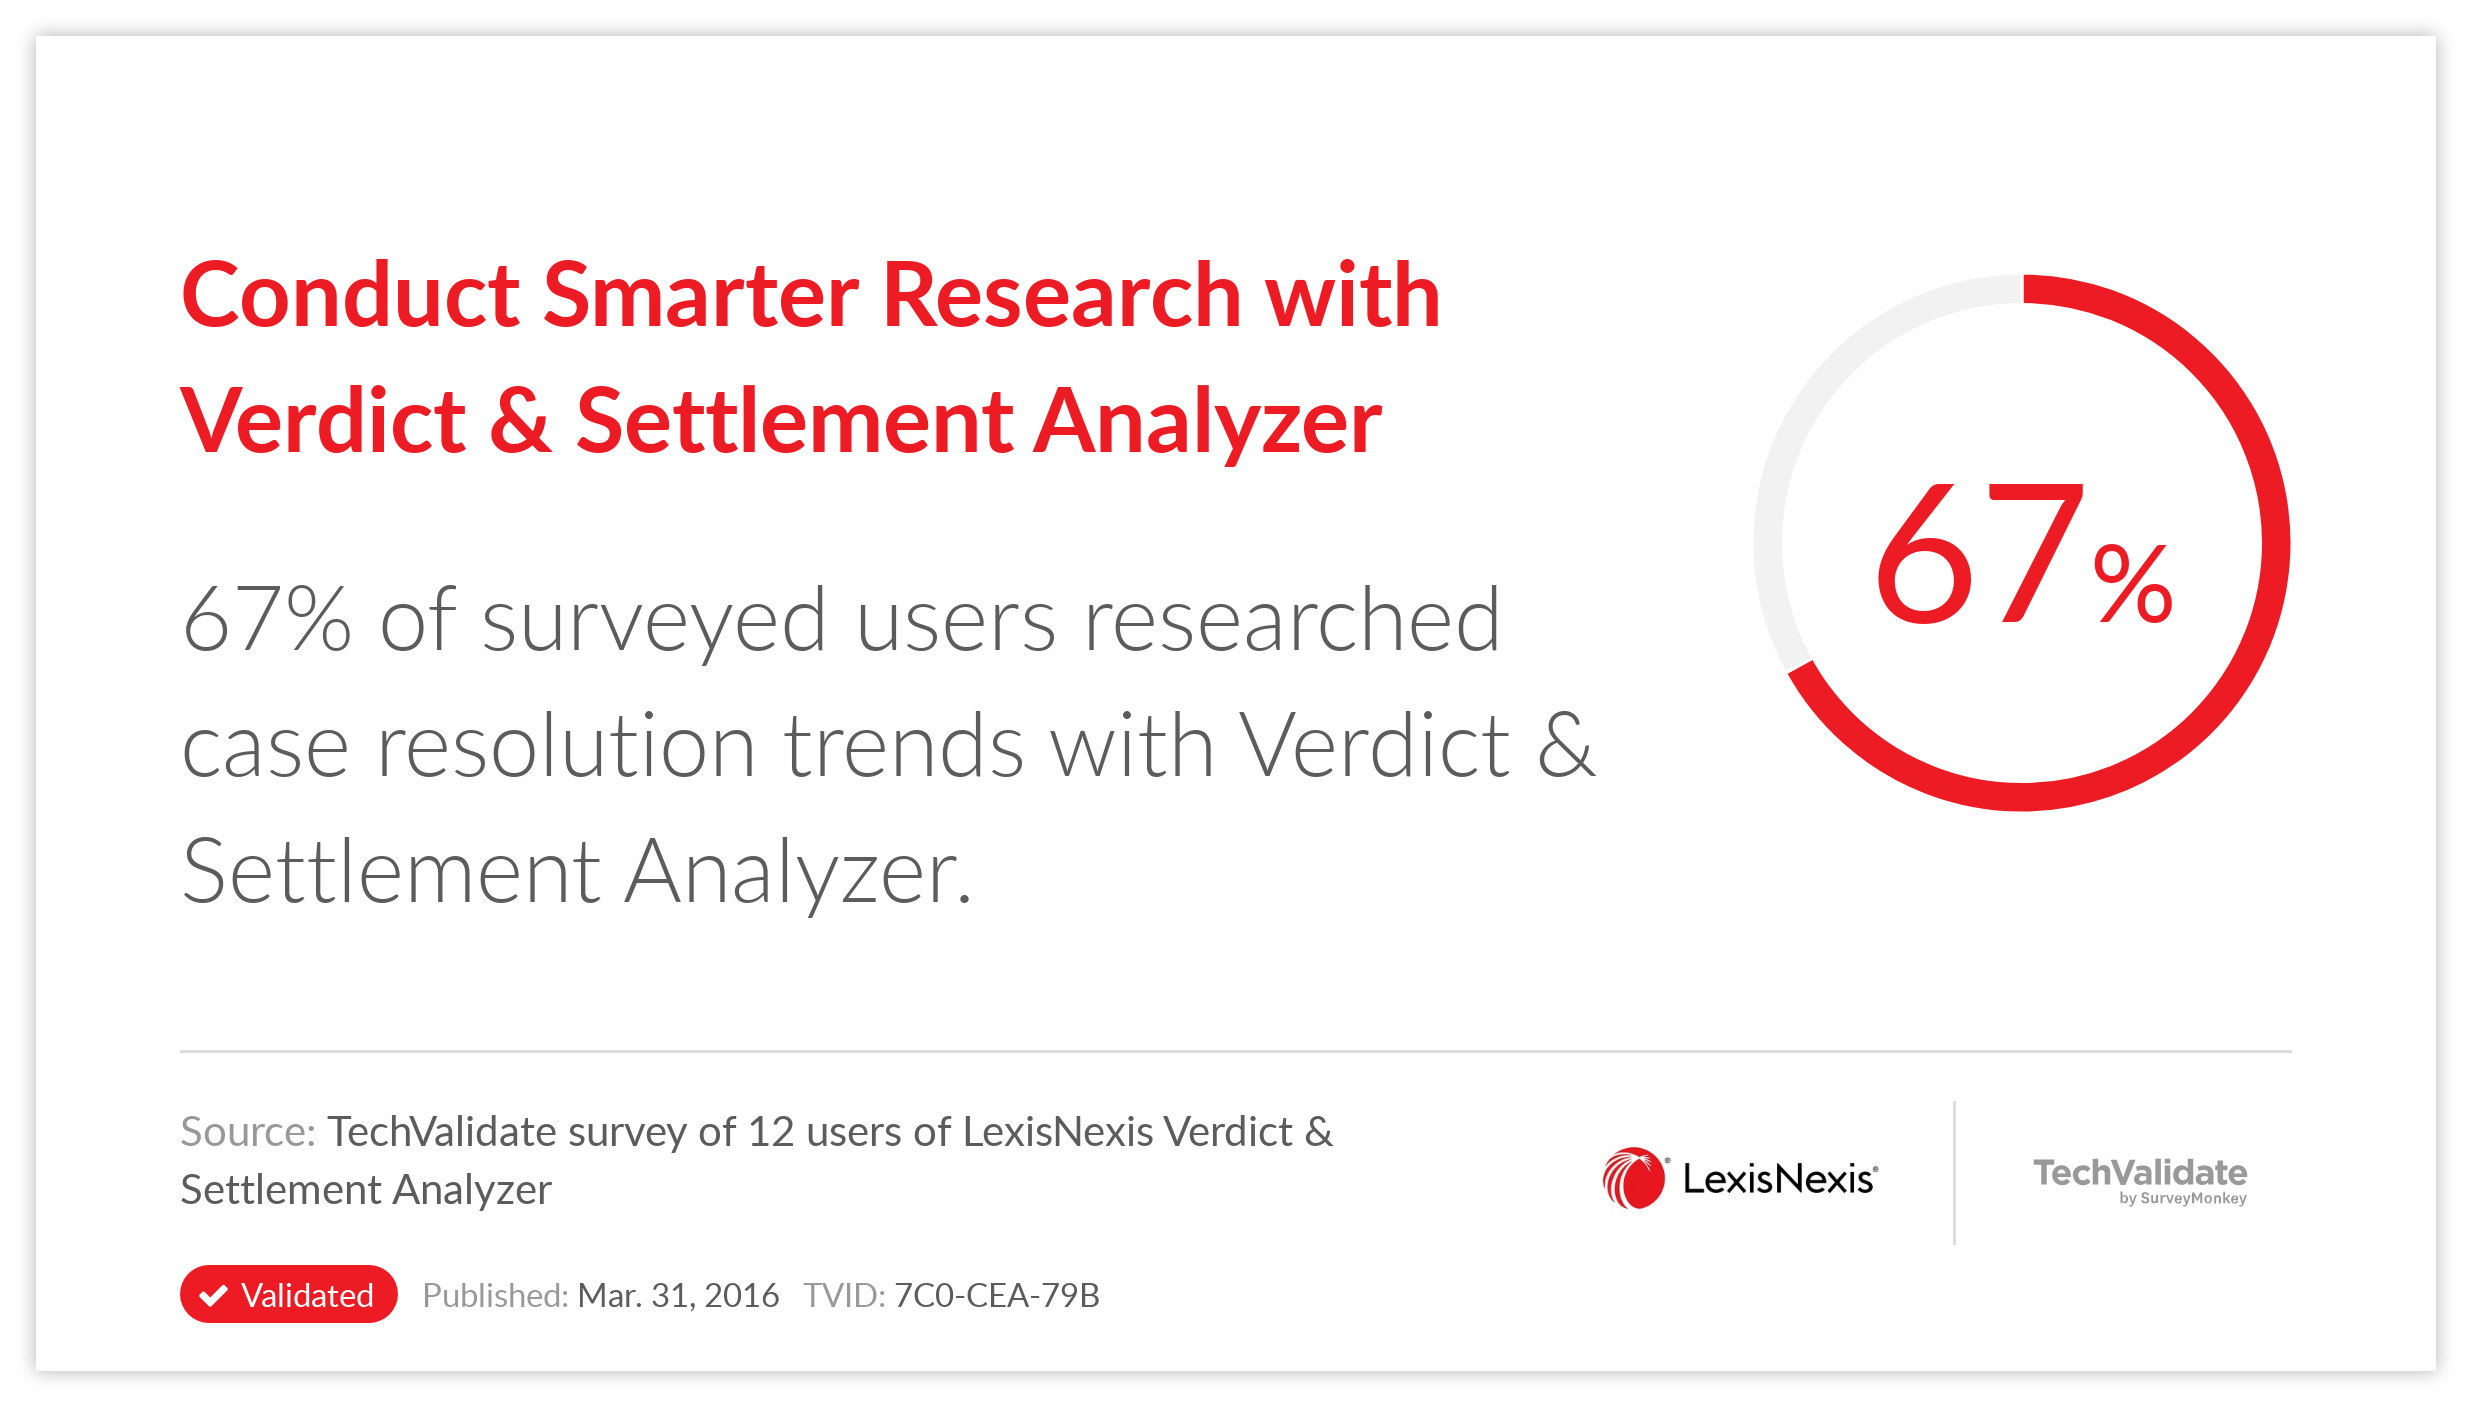 Conduct Smarter Research with Verdict & Settlement Analyzer